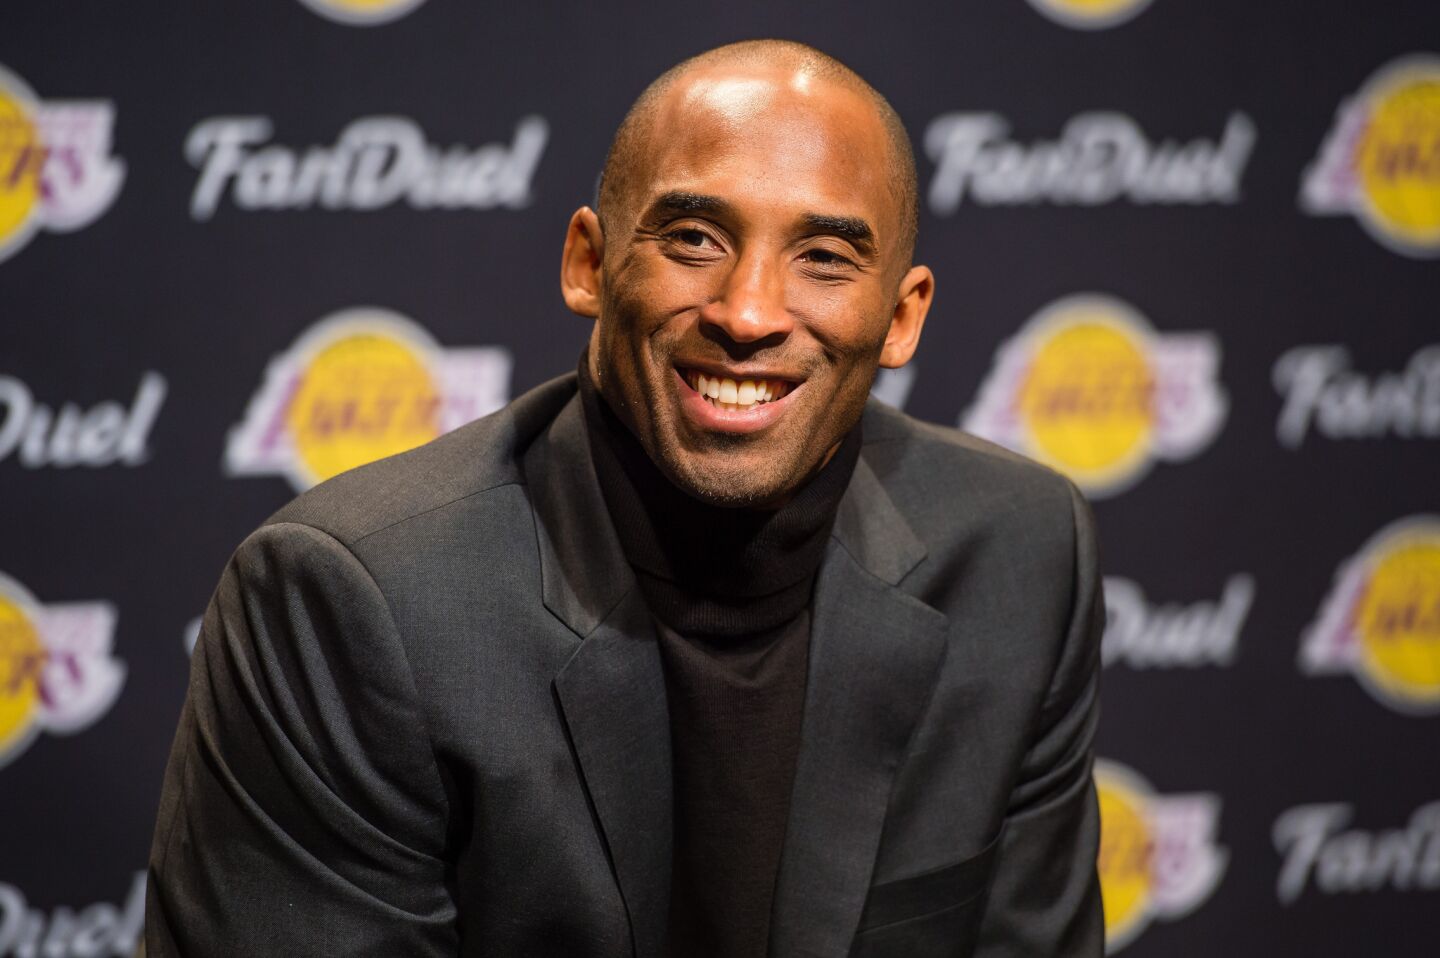 Kobe Bryant speaks at a news conference before a game against the Cavaliers in Cleveland on Thursday.